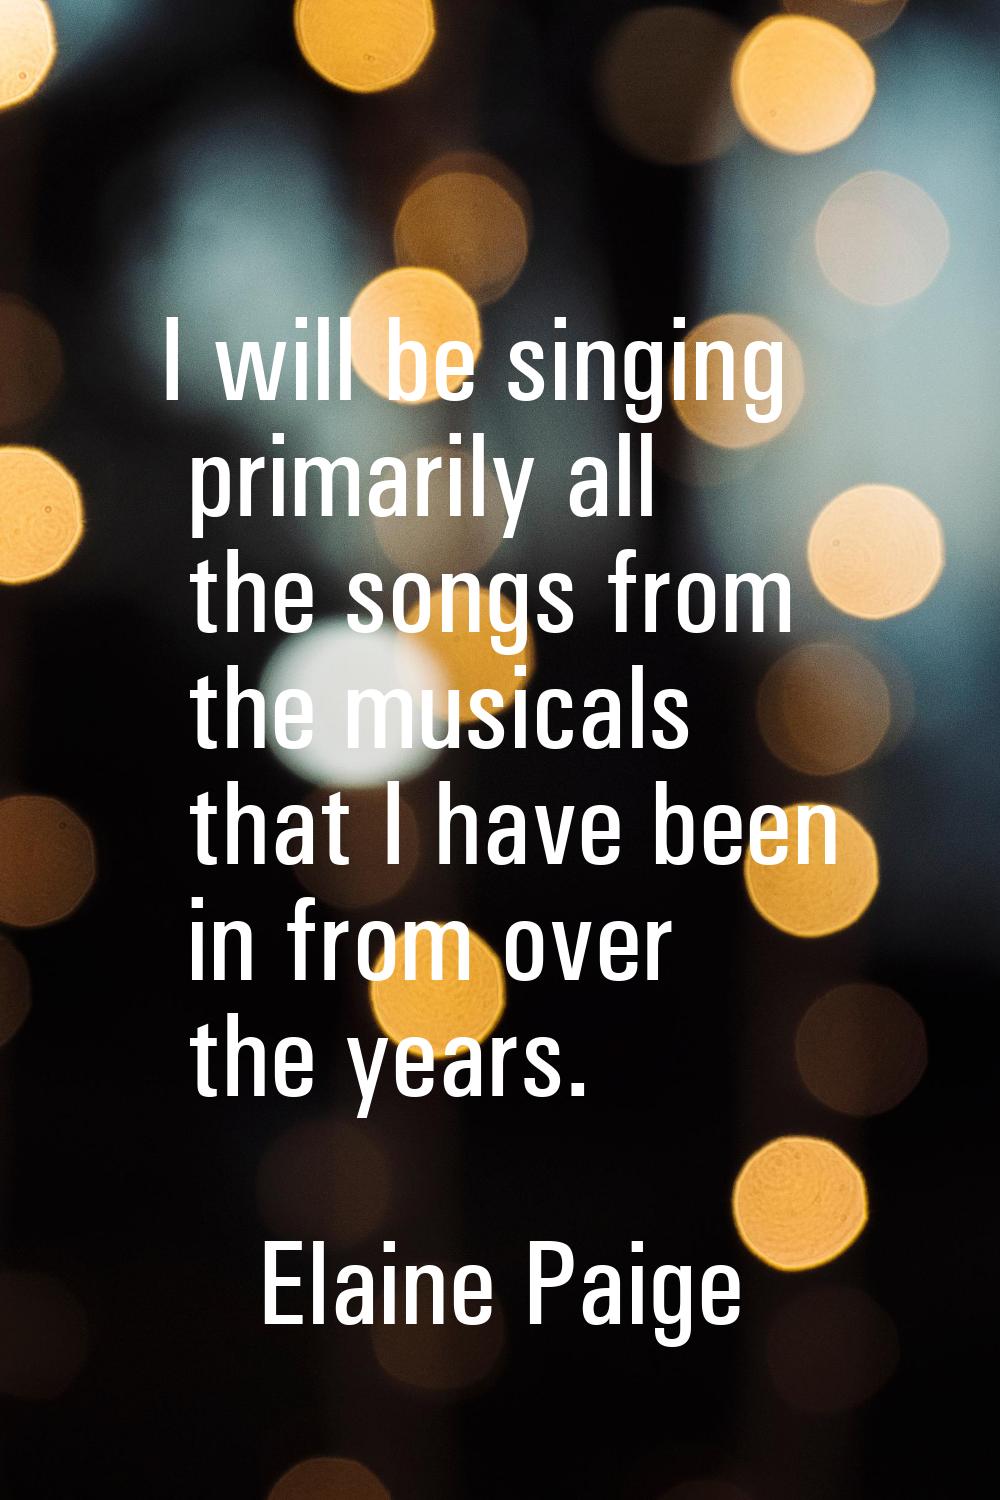 I will be singing primarily all the songs from the musicals that I have been in from over the years